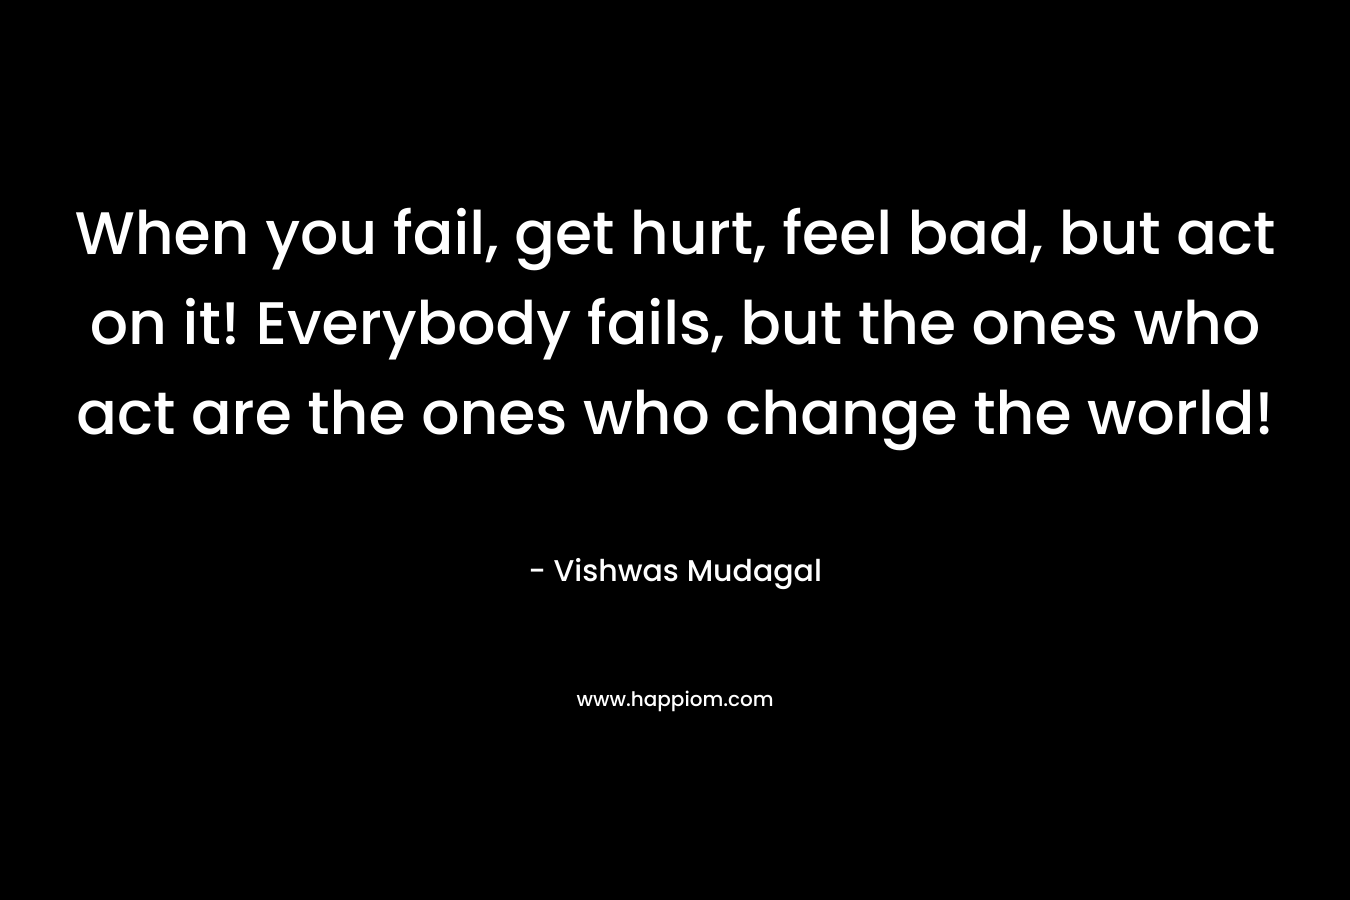 When you fail, get hurt, feel bad, but act on it! Everybody fails, but the ones who act are the ones who change the world! – Vishwas Mudagal